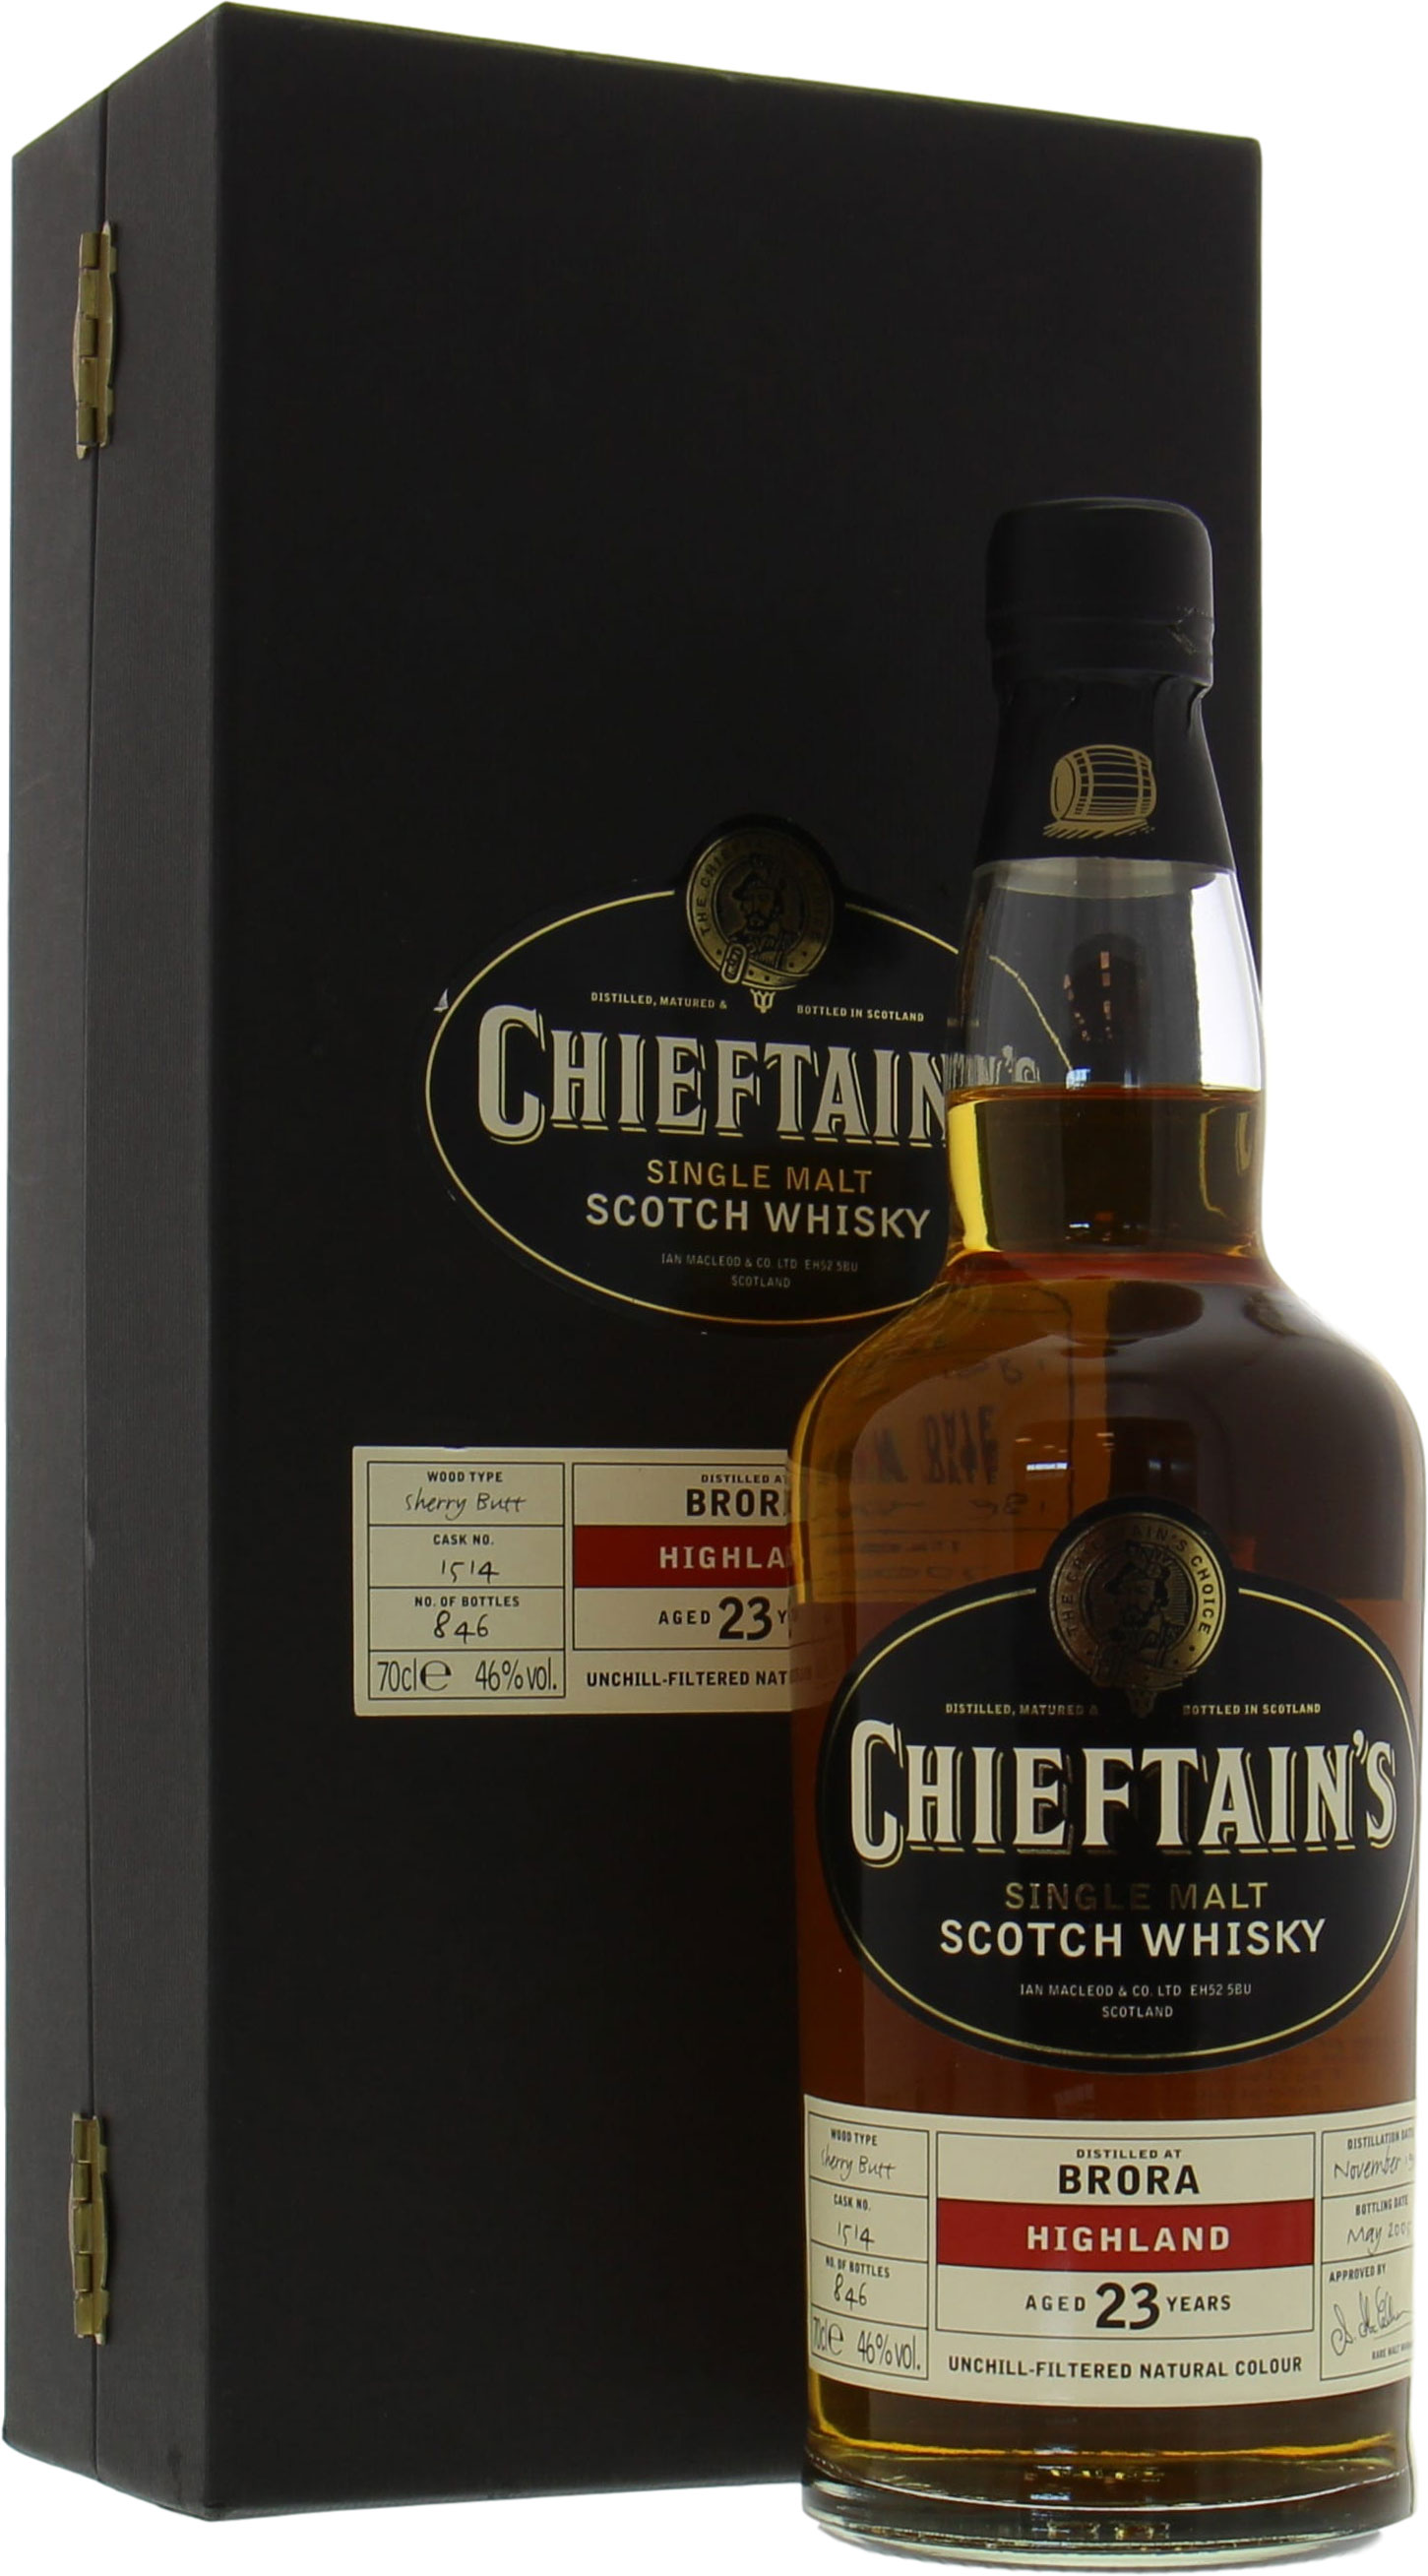 Brora - 23 Years Old Chieftains's Cask:1514 46% 1981 In Original Container